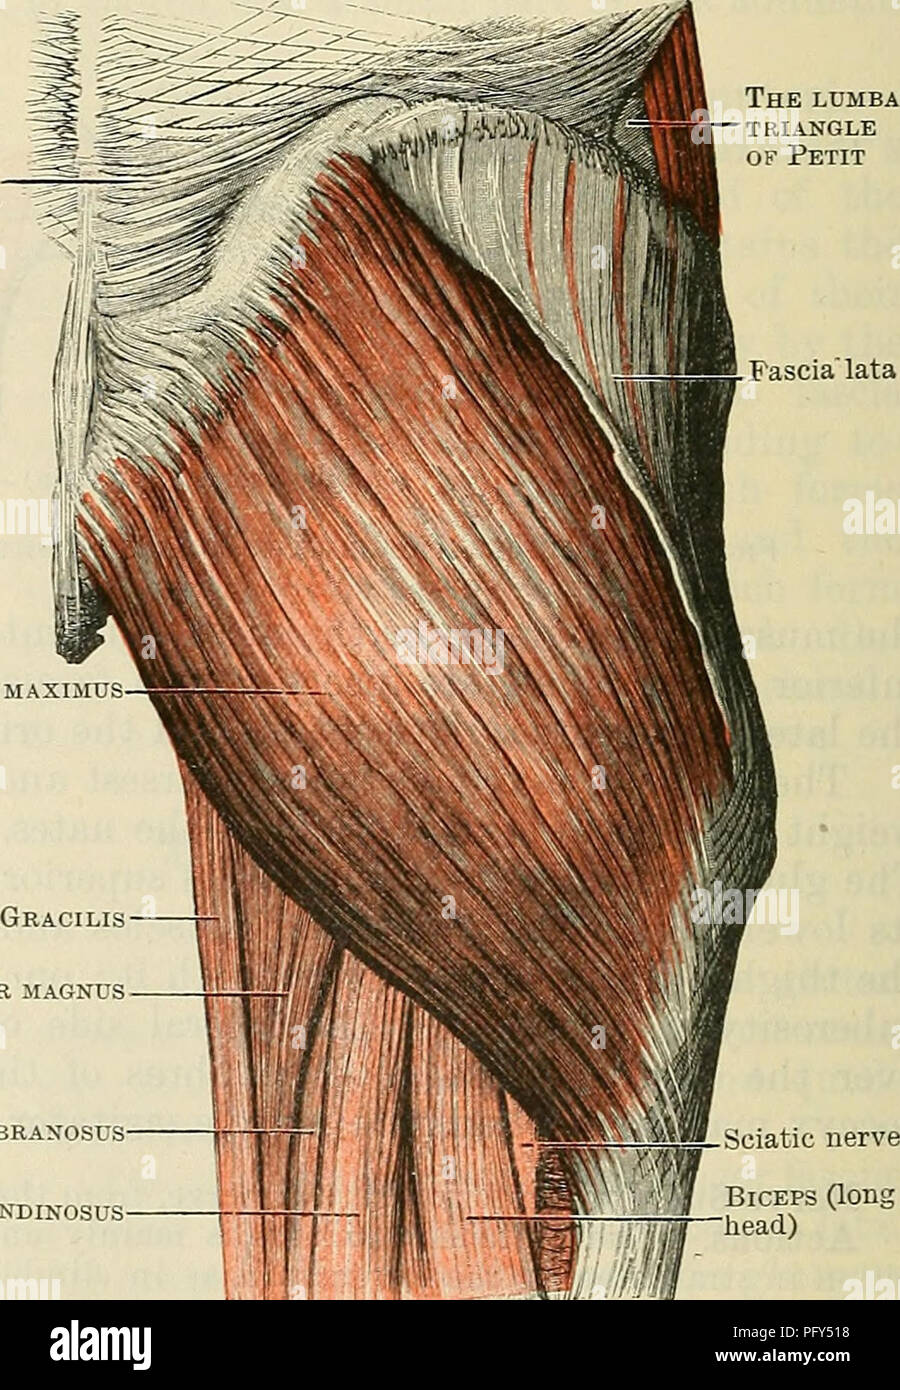 . Cunningham's Text-book of anatomy. Anatomy. and the dorsum ilii just lateral to the superior anterior spine, and from the fascia covering its lateral surface (Fig. 369, p. 415). Invested like the gluteus maximus by the fascia lata, it is inserted distal to the level of the us and greater trochanter of the femur into the fascia, which forms the ilio-tibial tract (p. 404). The muscle is placed along the an- terior borders of the gluteus medius and gluteus minimus. Gluteus maximus (insertion) Adductor magnus (insertion) Adductor brevis (insertion) Pectineus (insertion) Vastus medialis (origin)  Stock Photo